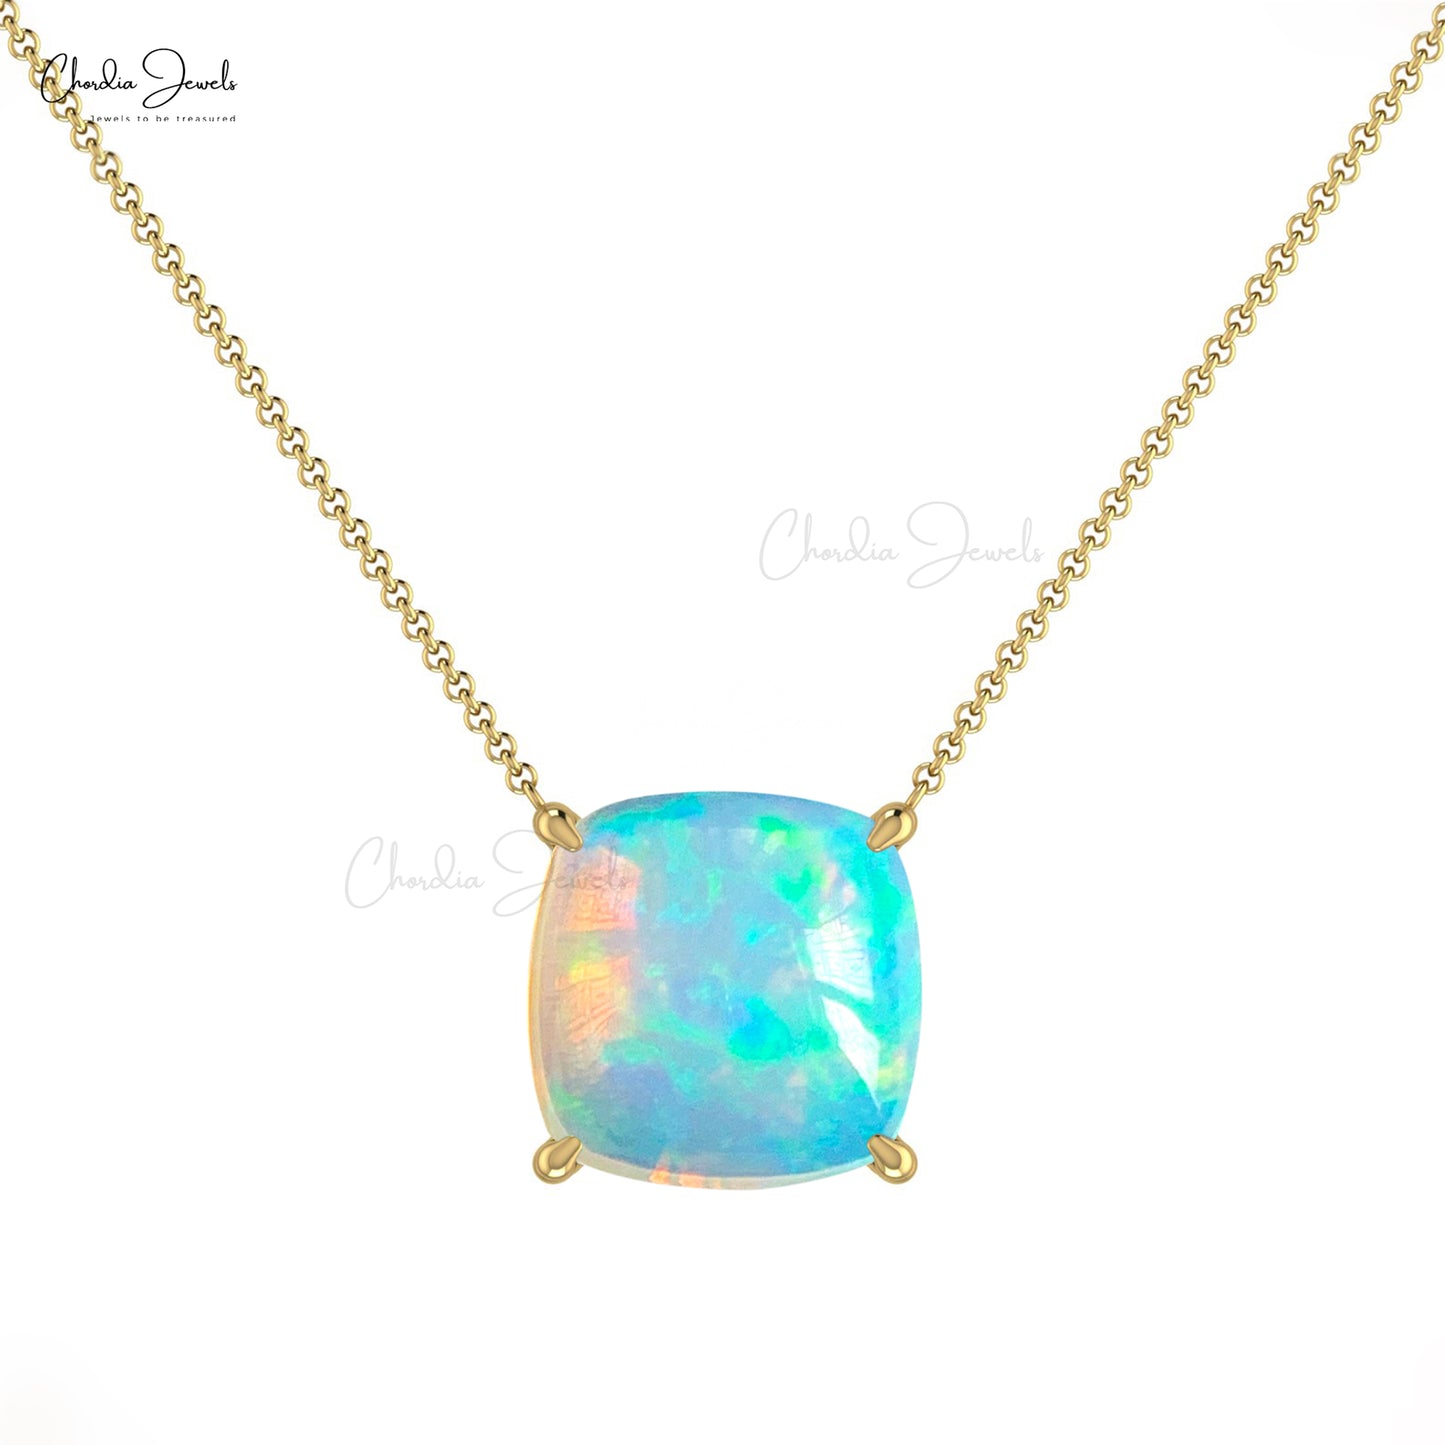 Simple Bezel Set Opal Pendant with Stunning Australian Crystal Opal |  Exquisite Jewelry for Every Occasion | FWCJ